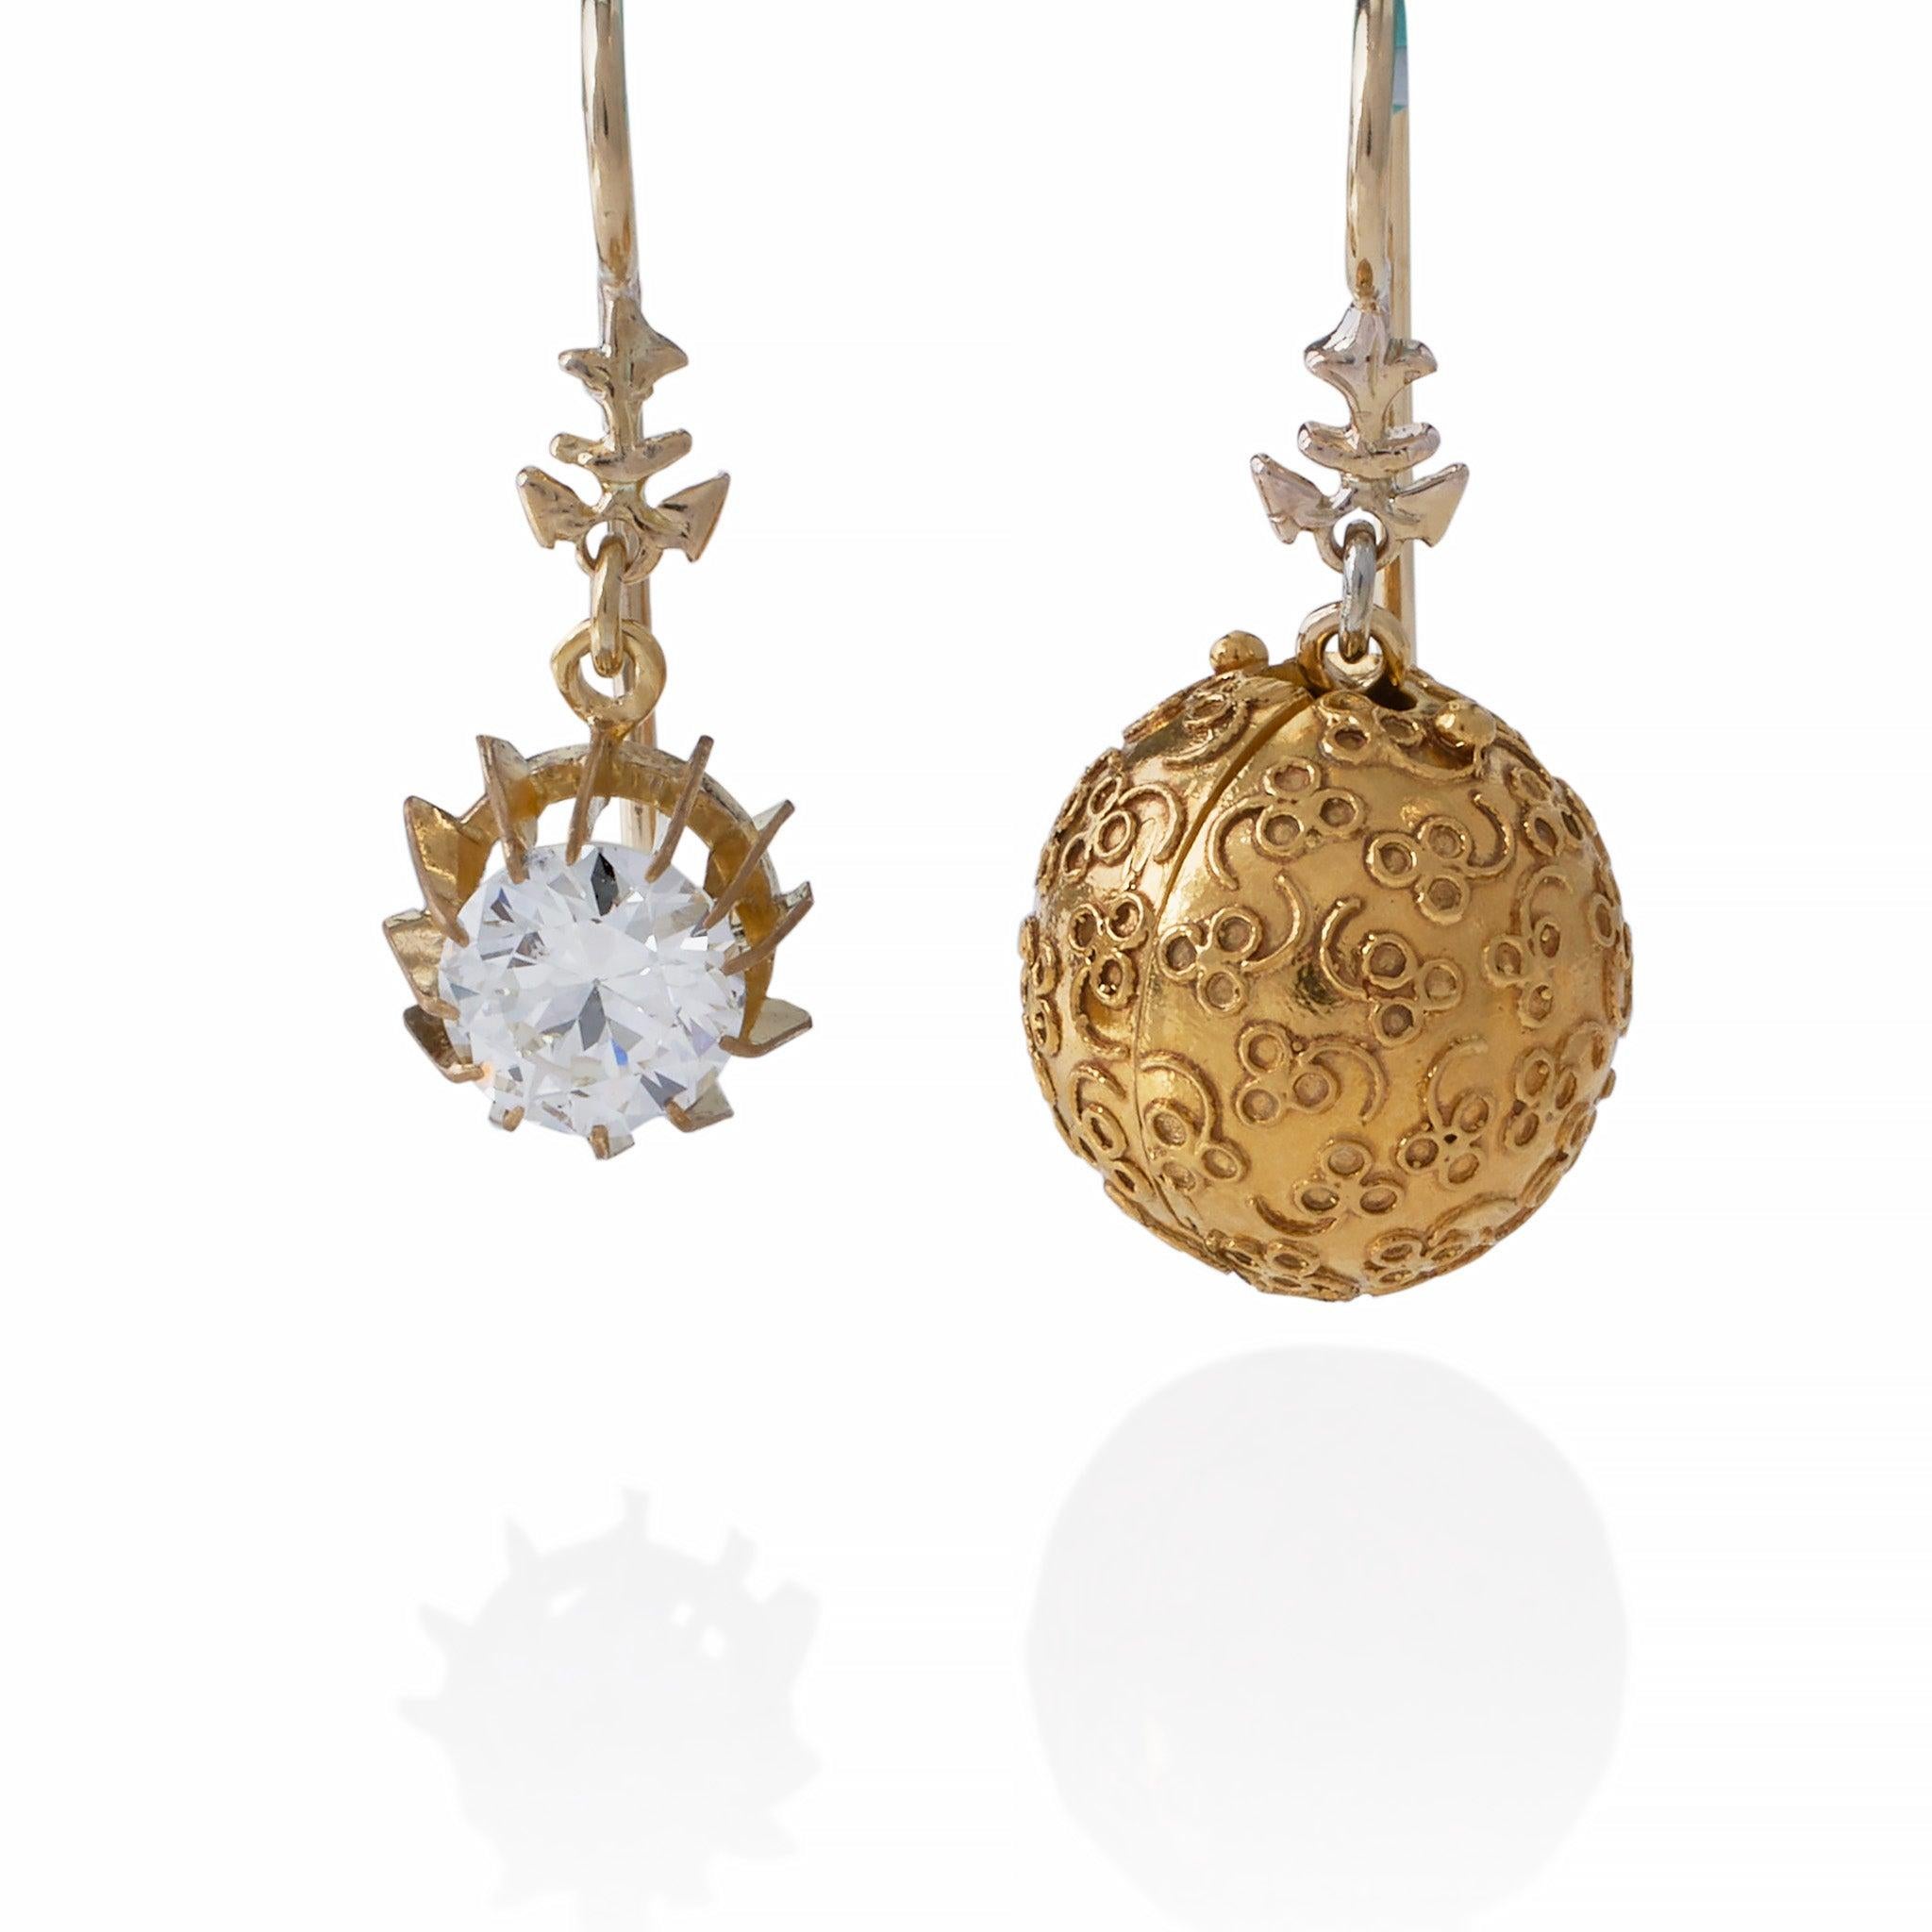 These convertible day/night pendant earrings feature old European-cut diamonds mounted in 18K gold. Each is designed as a shaped gold top suspending a removable hinged sphere with applied wirework decoration, opening to reveal a prong-set old